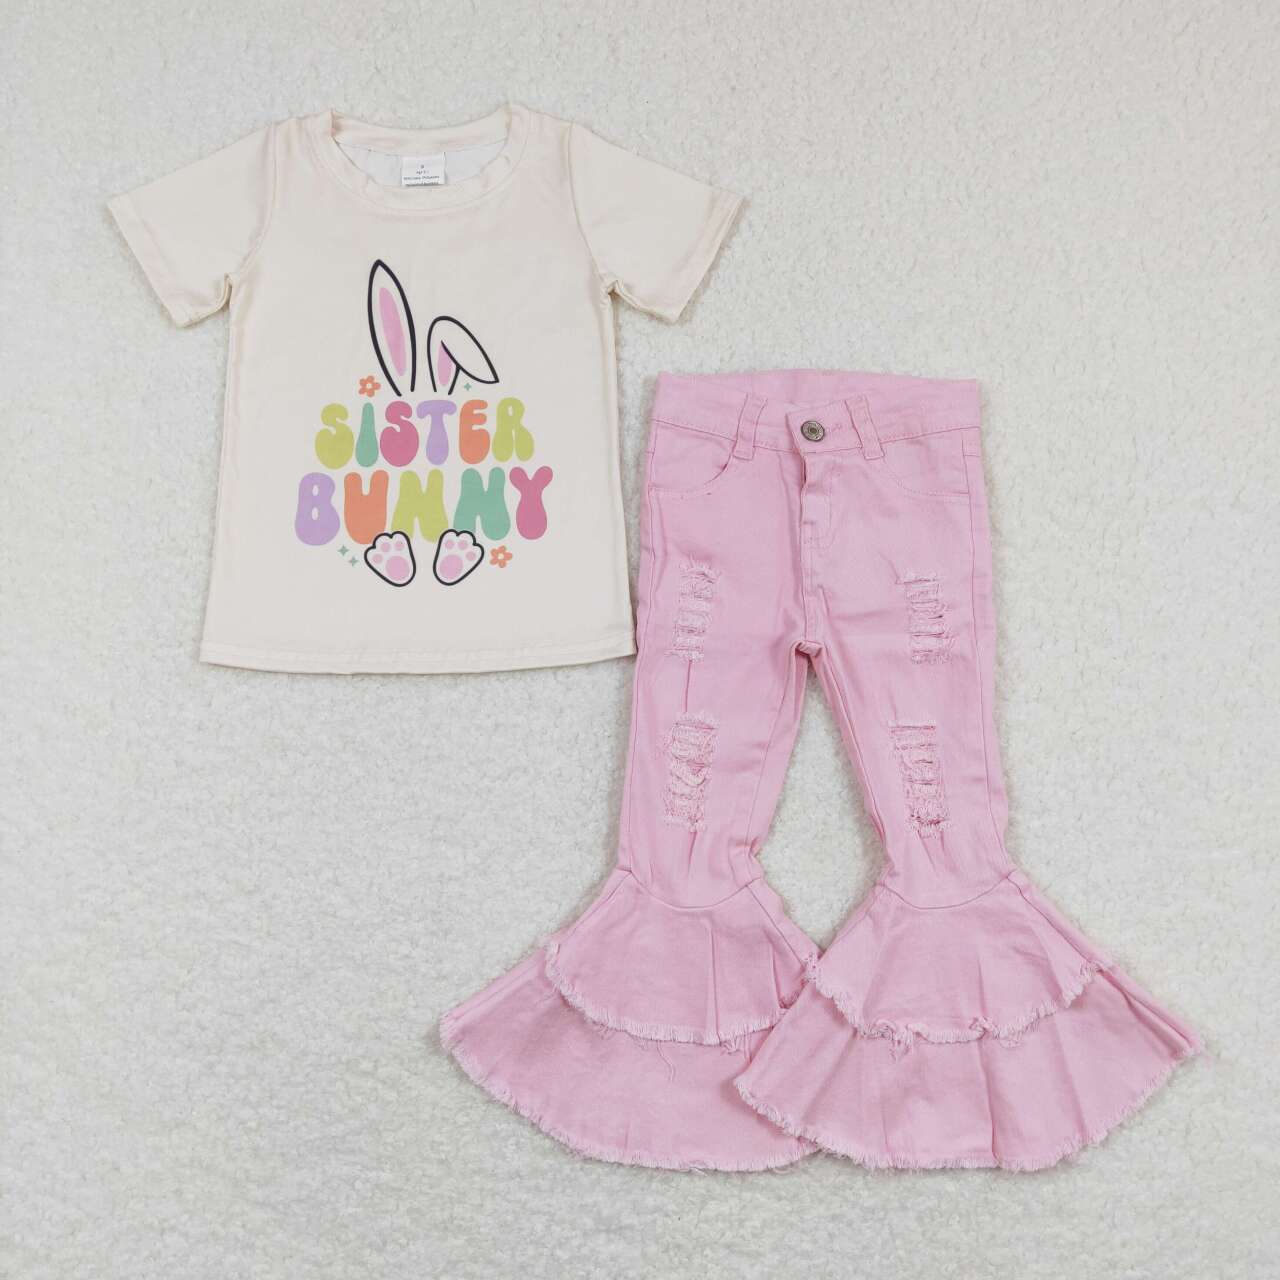 GSPO1134 Sister Bunny Top Pink Hole Denim Bell Jeans Girls Easter Clothes Set